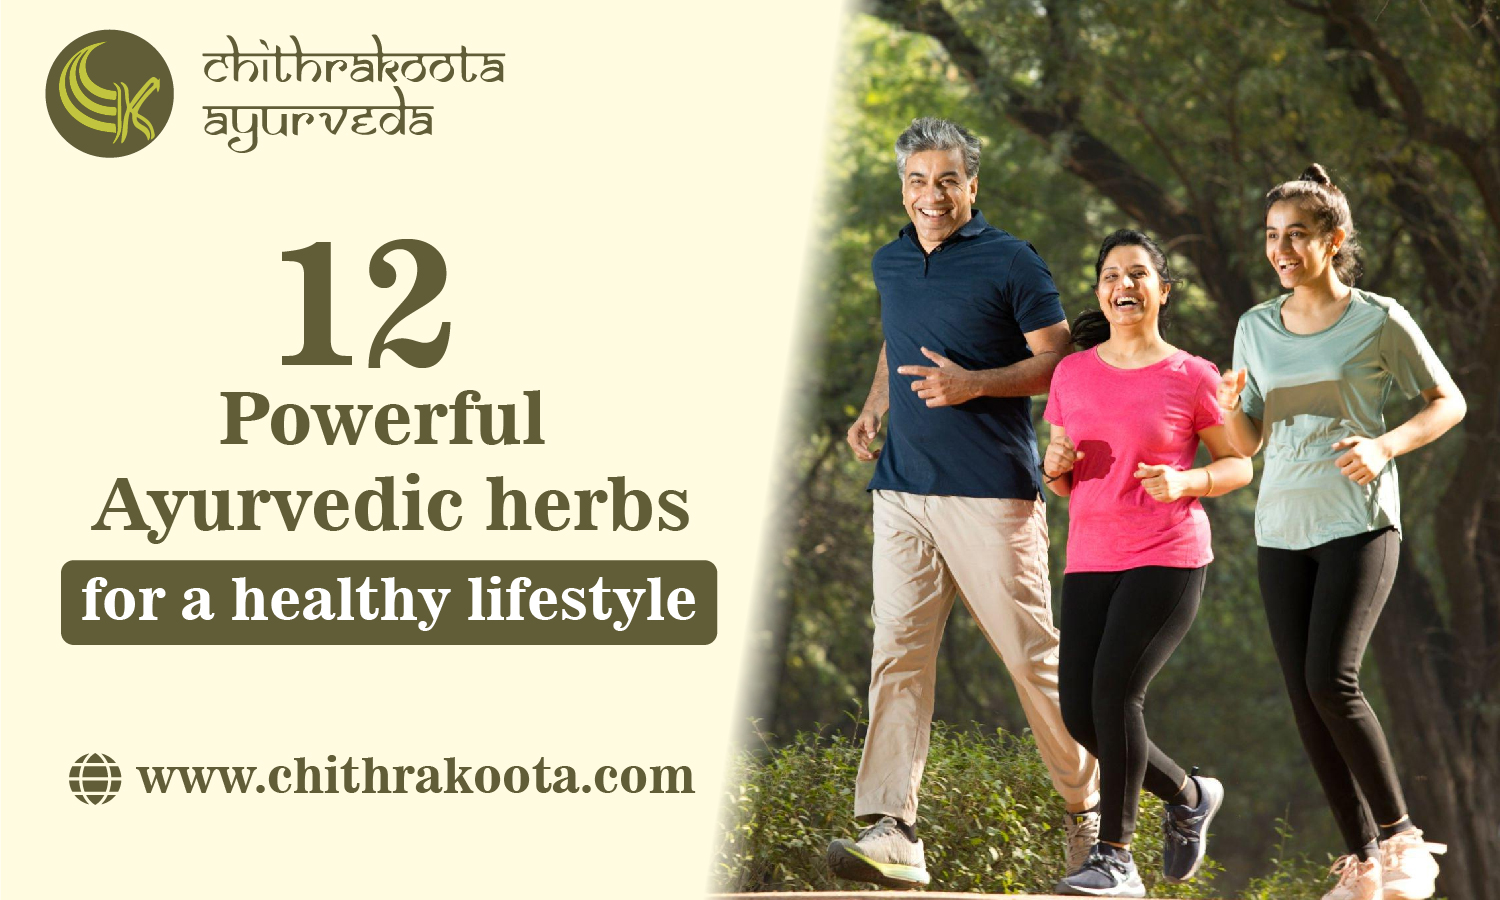 12 Powerful Ayurvedic herbs for a healthy lifestyle